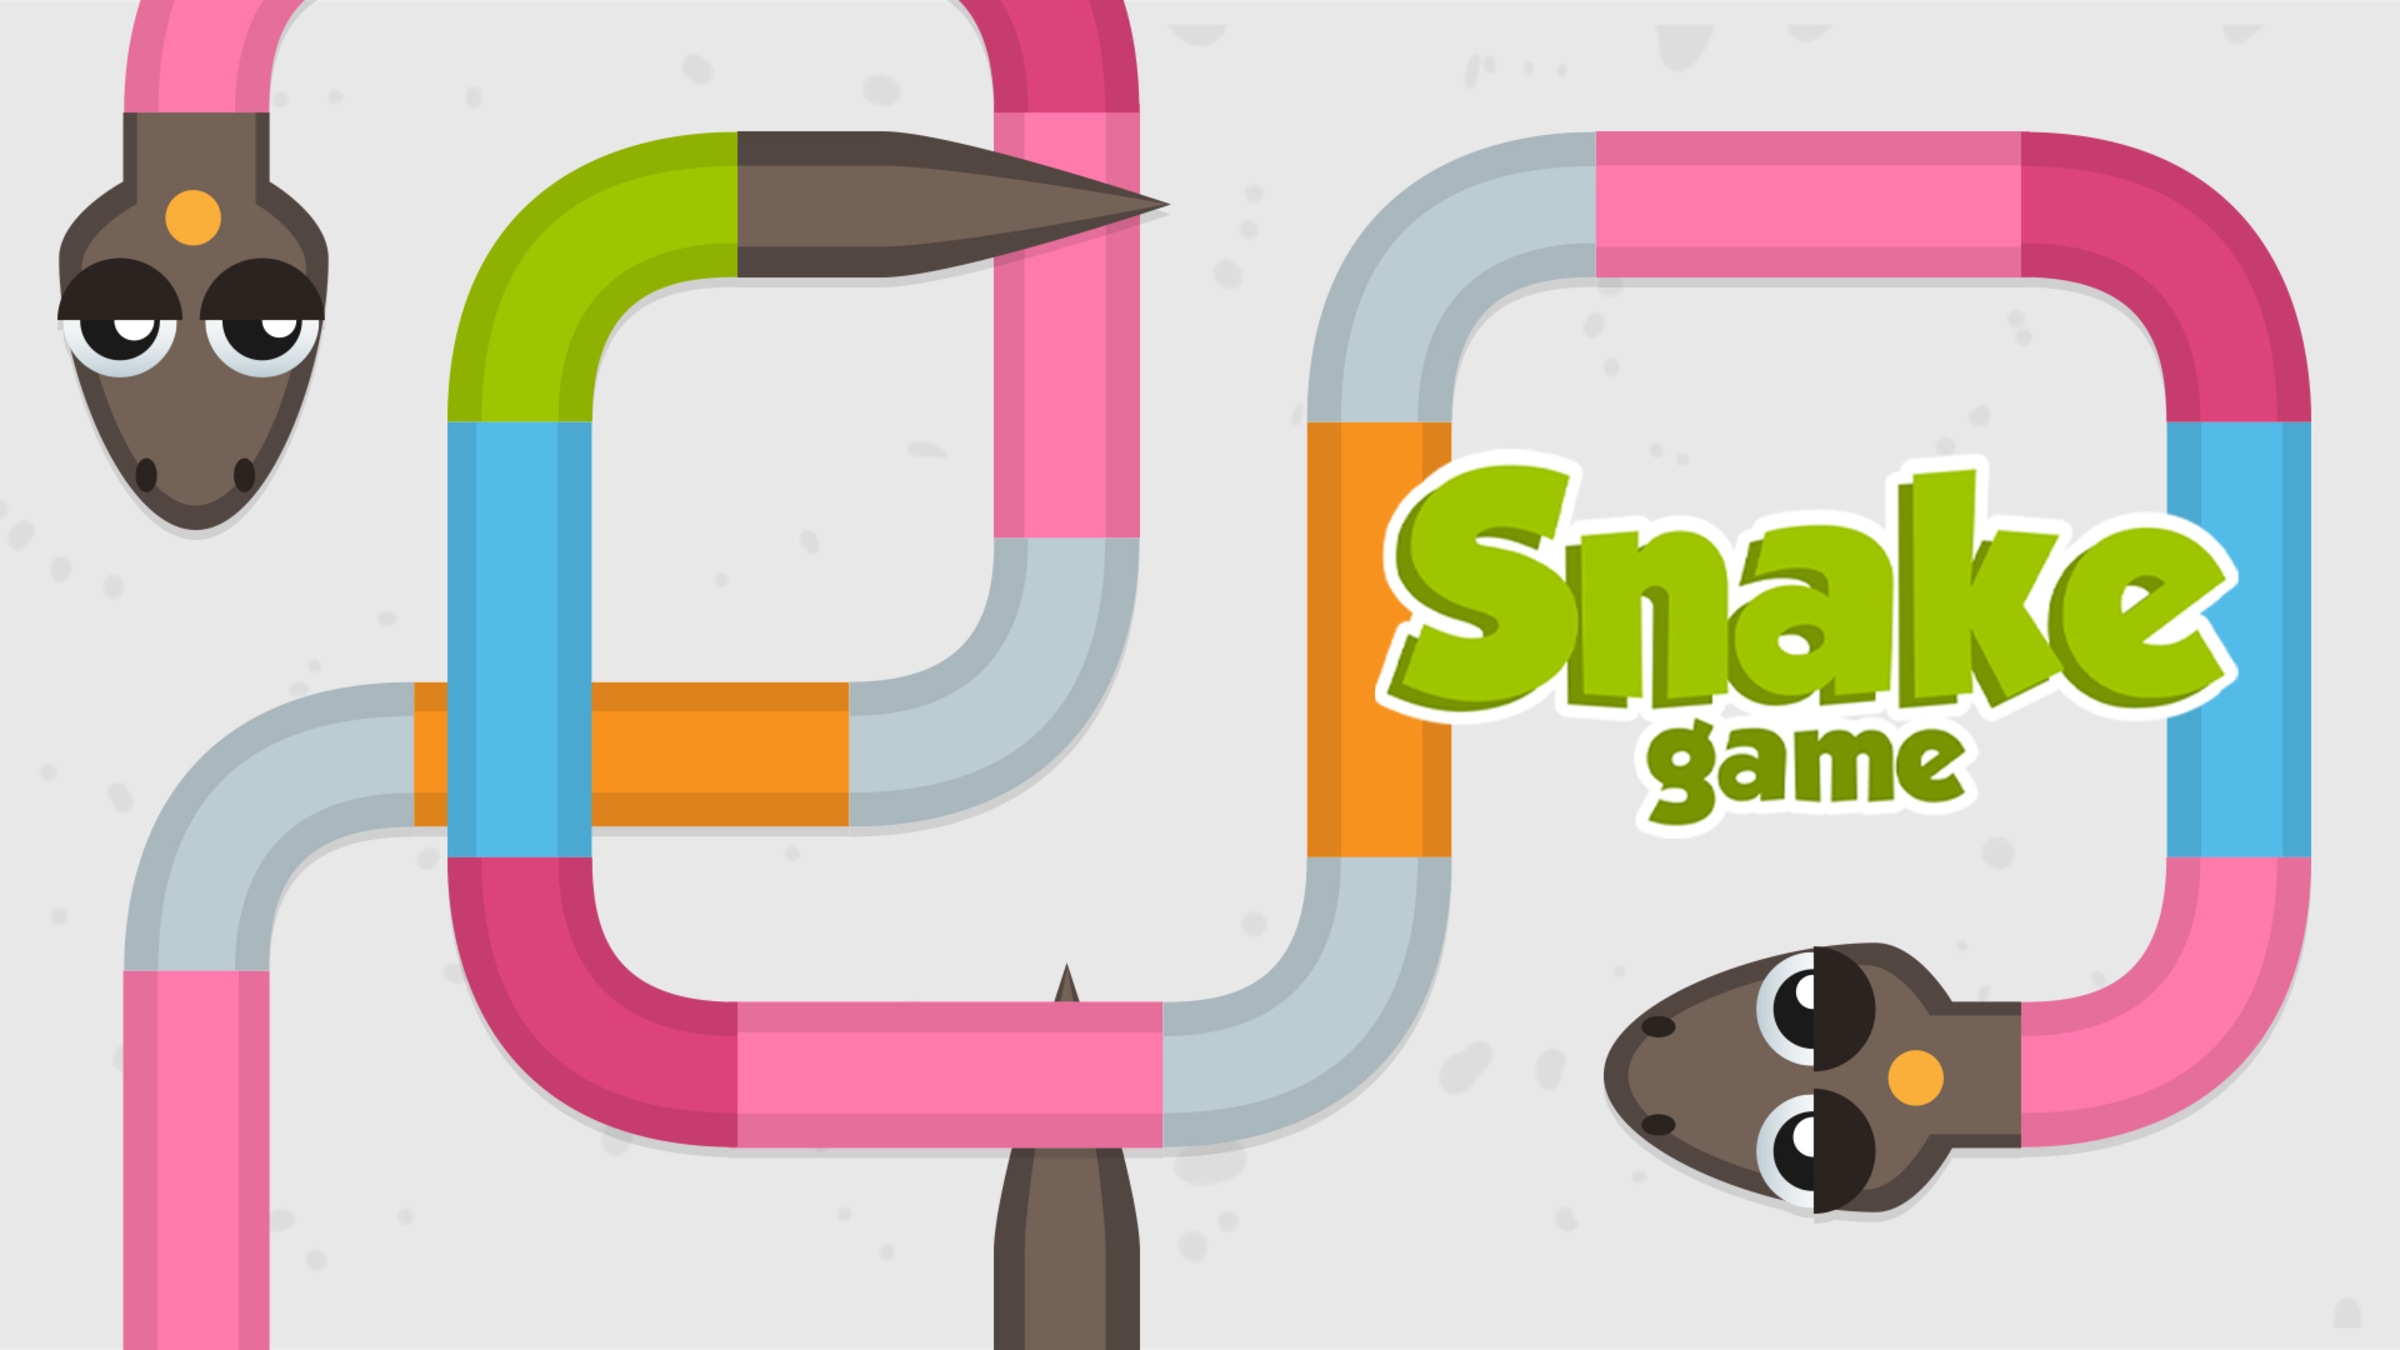 Play Snake games online for free